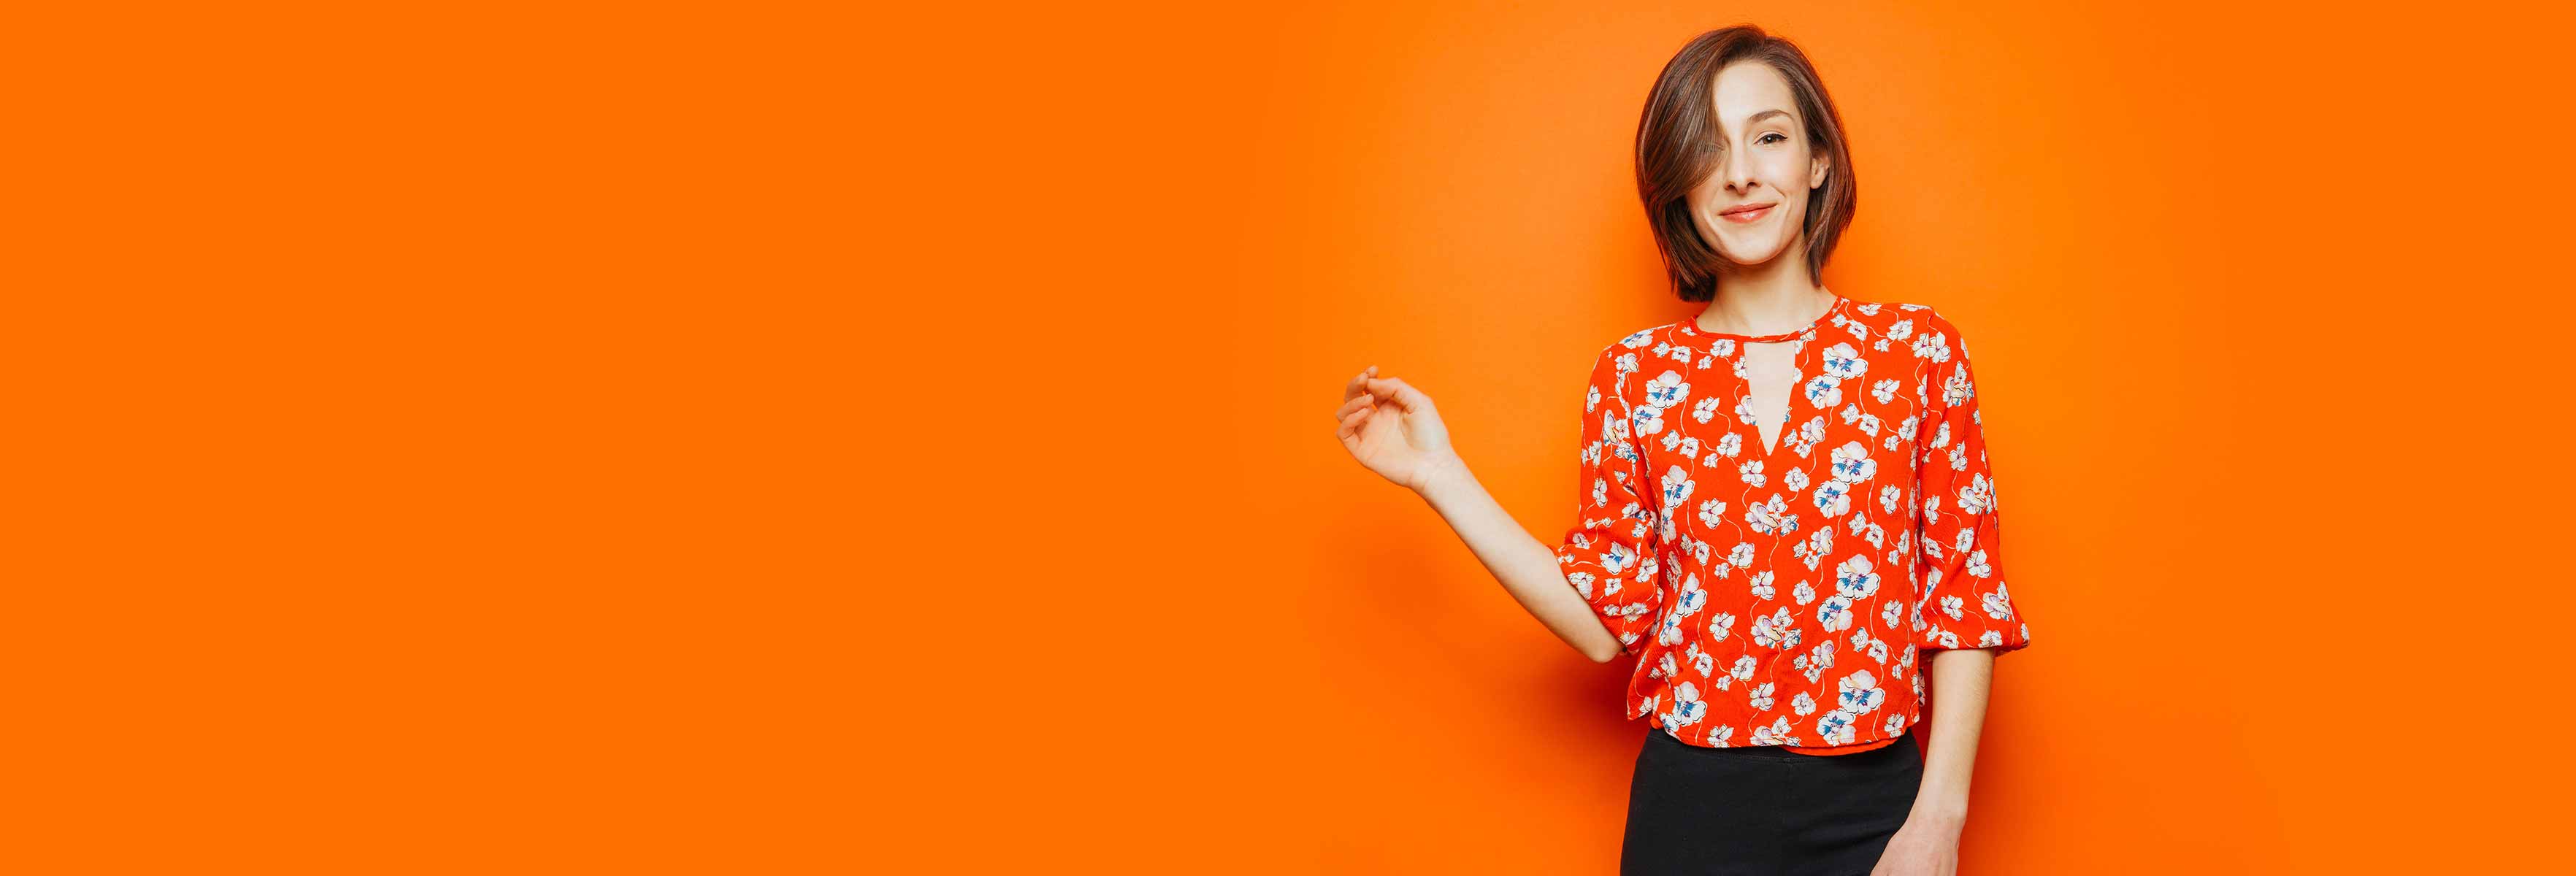 young girl in red shirt in orange background  banner image